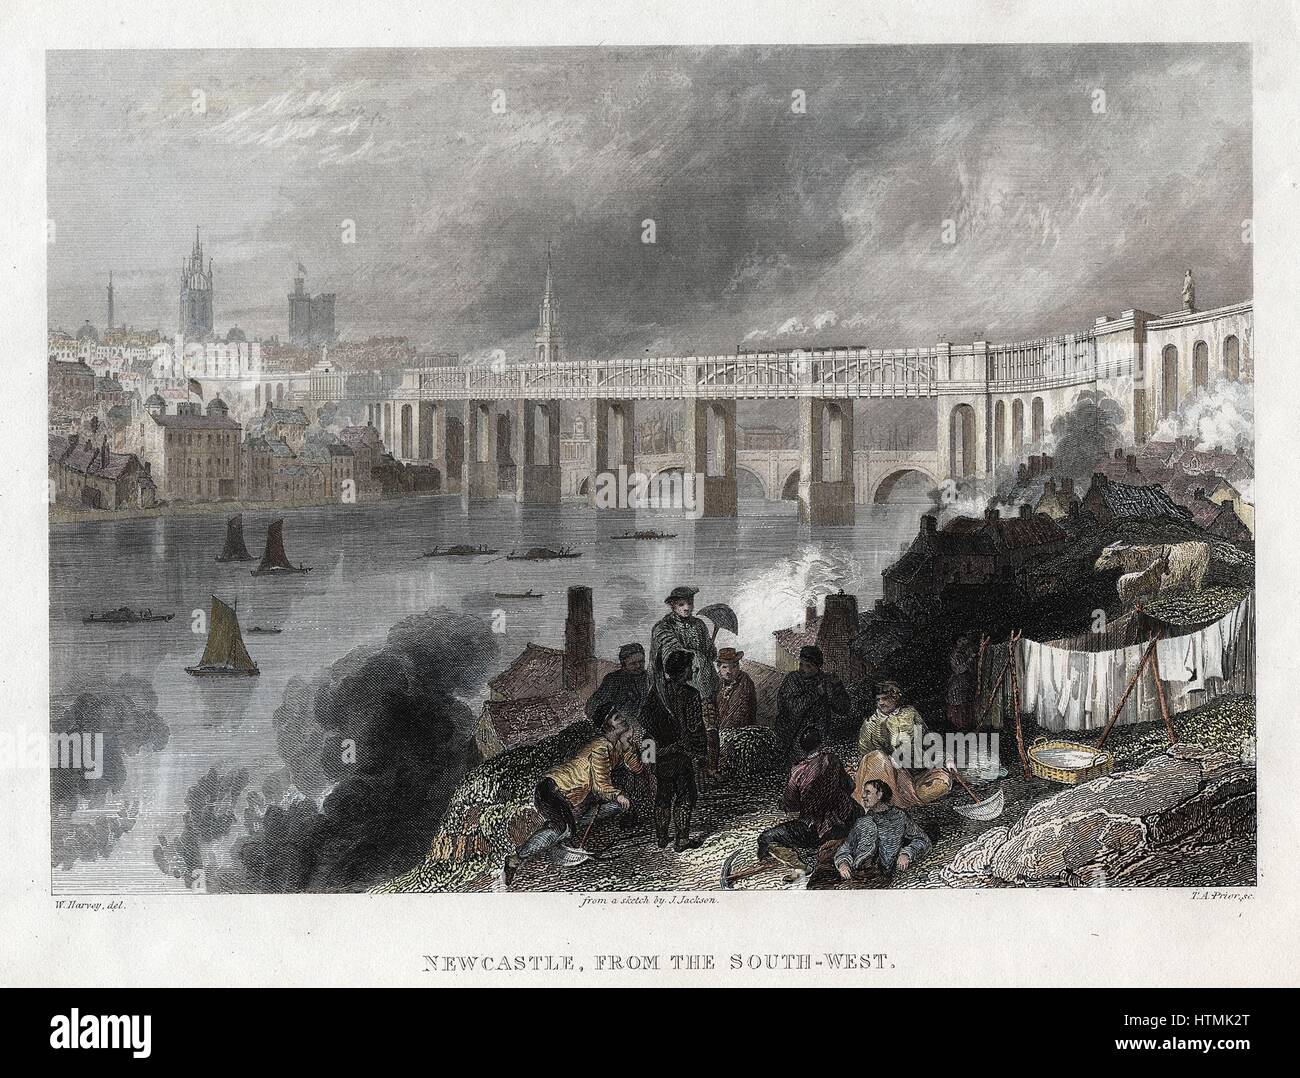 High Level Bridge over the Tyne at Newcastle, built by Robert Stephenson between 1846 and 1849. Bow-string girder, North British Railway. District of mining & heavy industry. Hand-coloured engraving Stock Photo